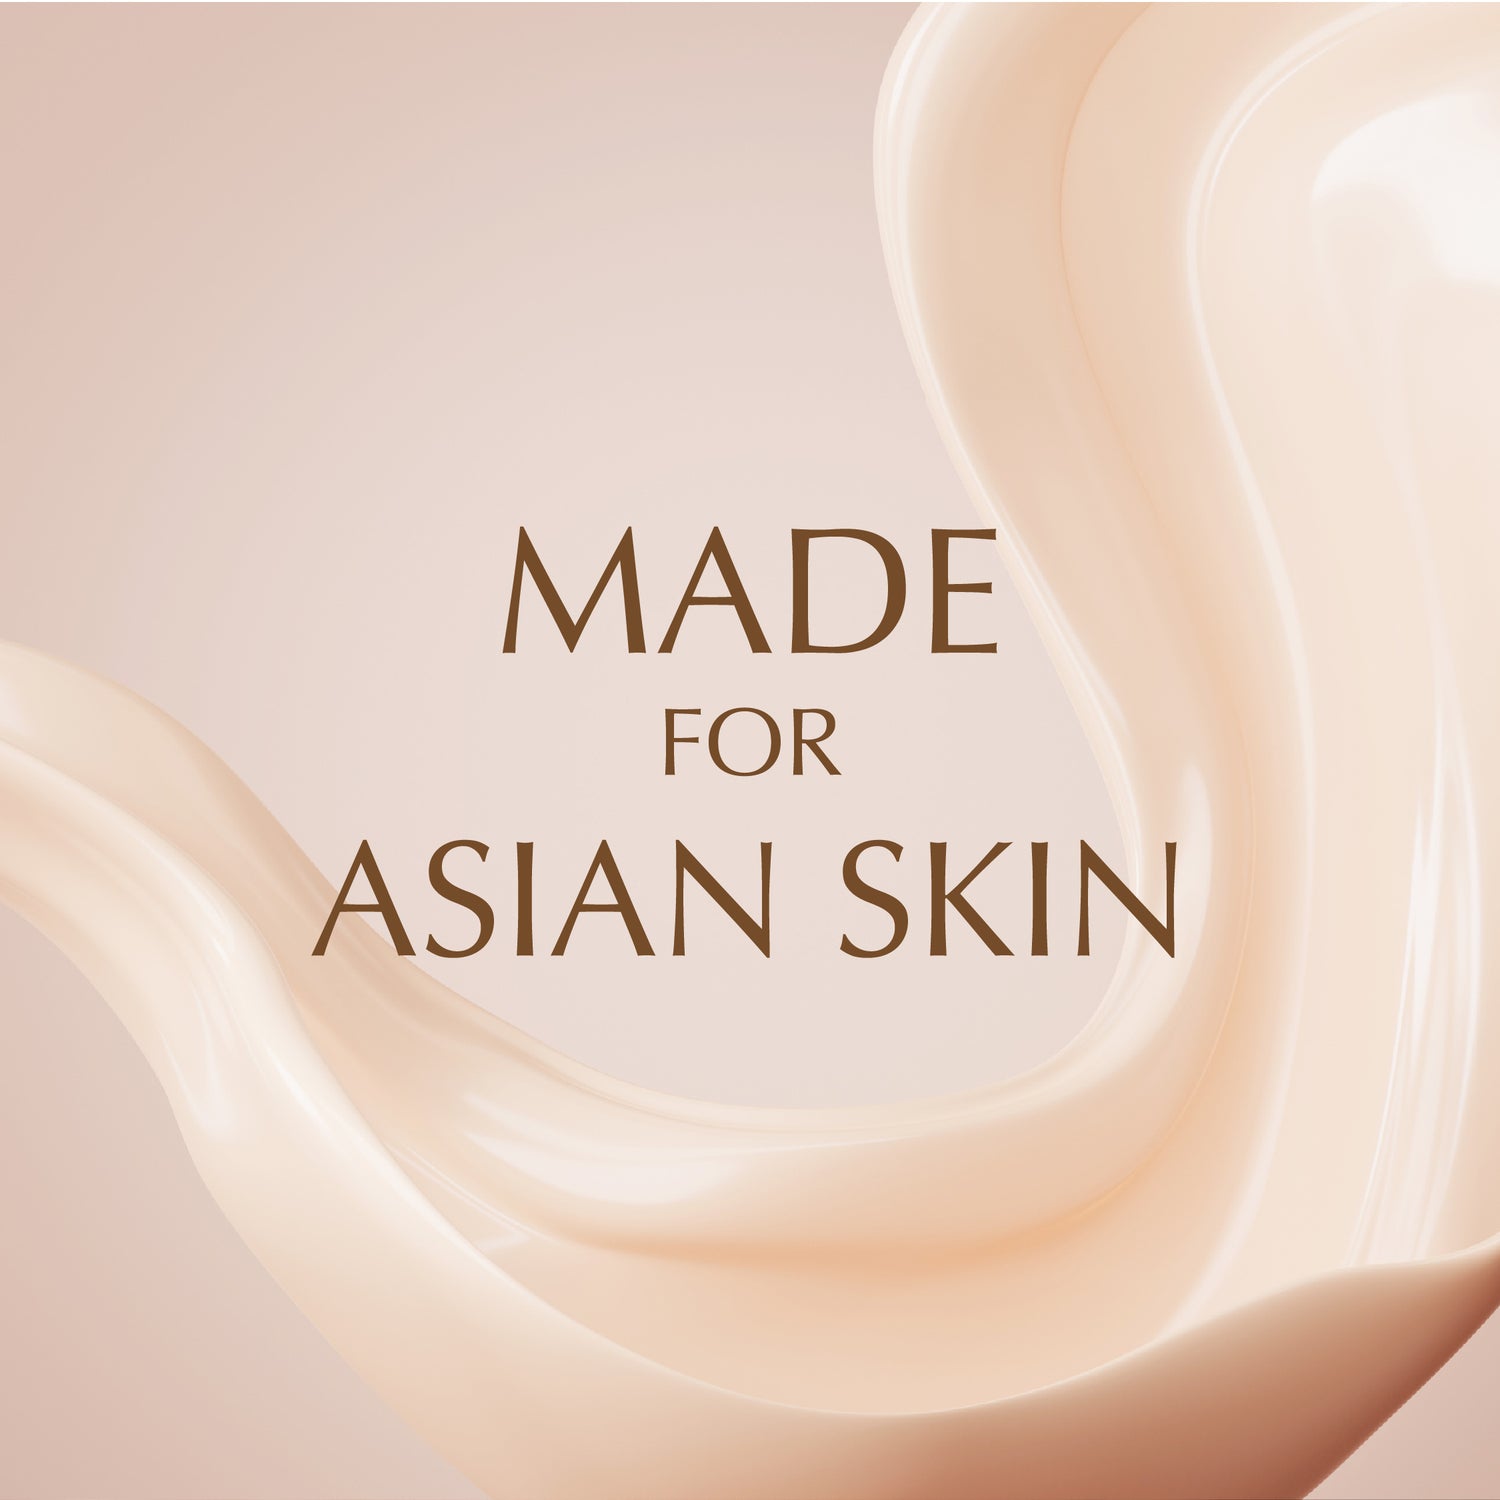 Made for asian skin